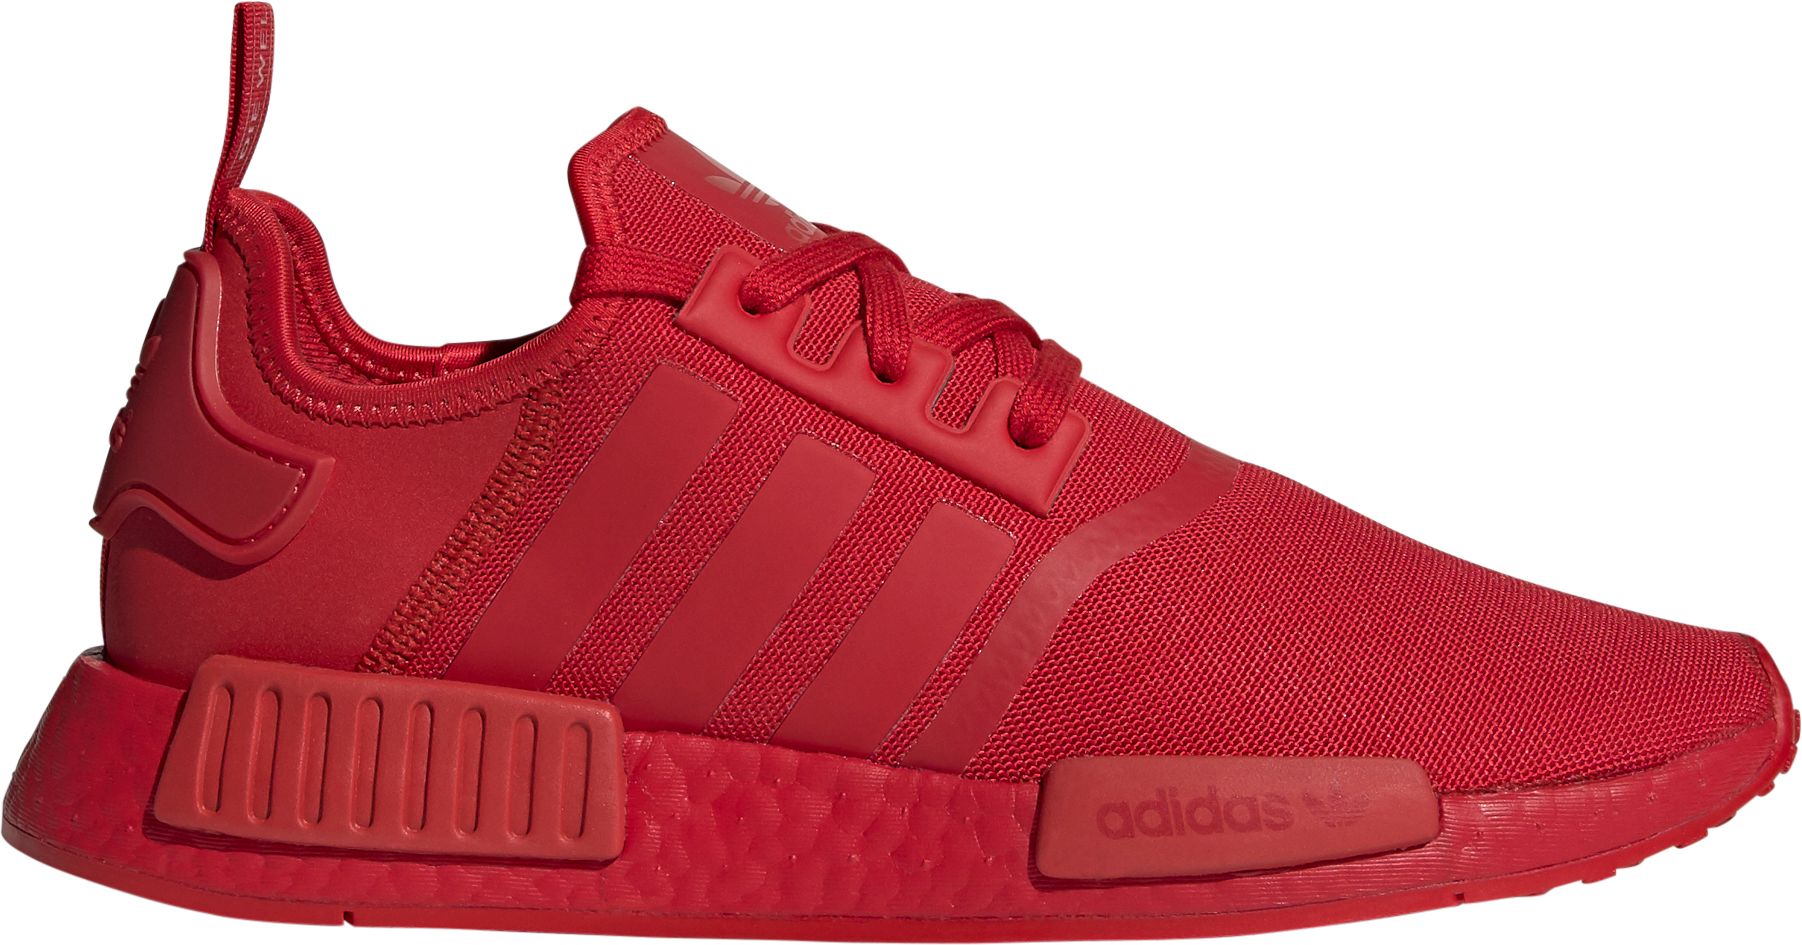 adidas shoes for women red